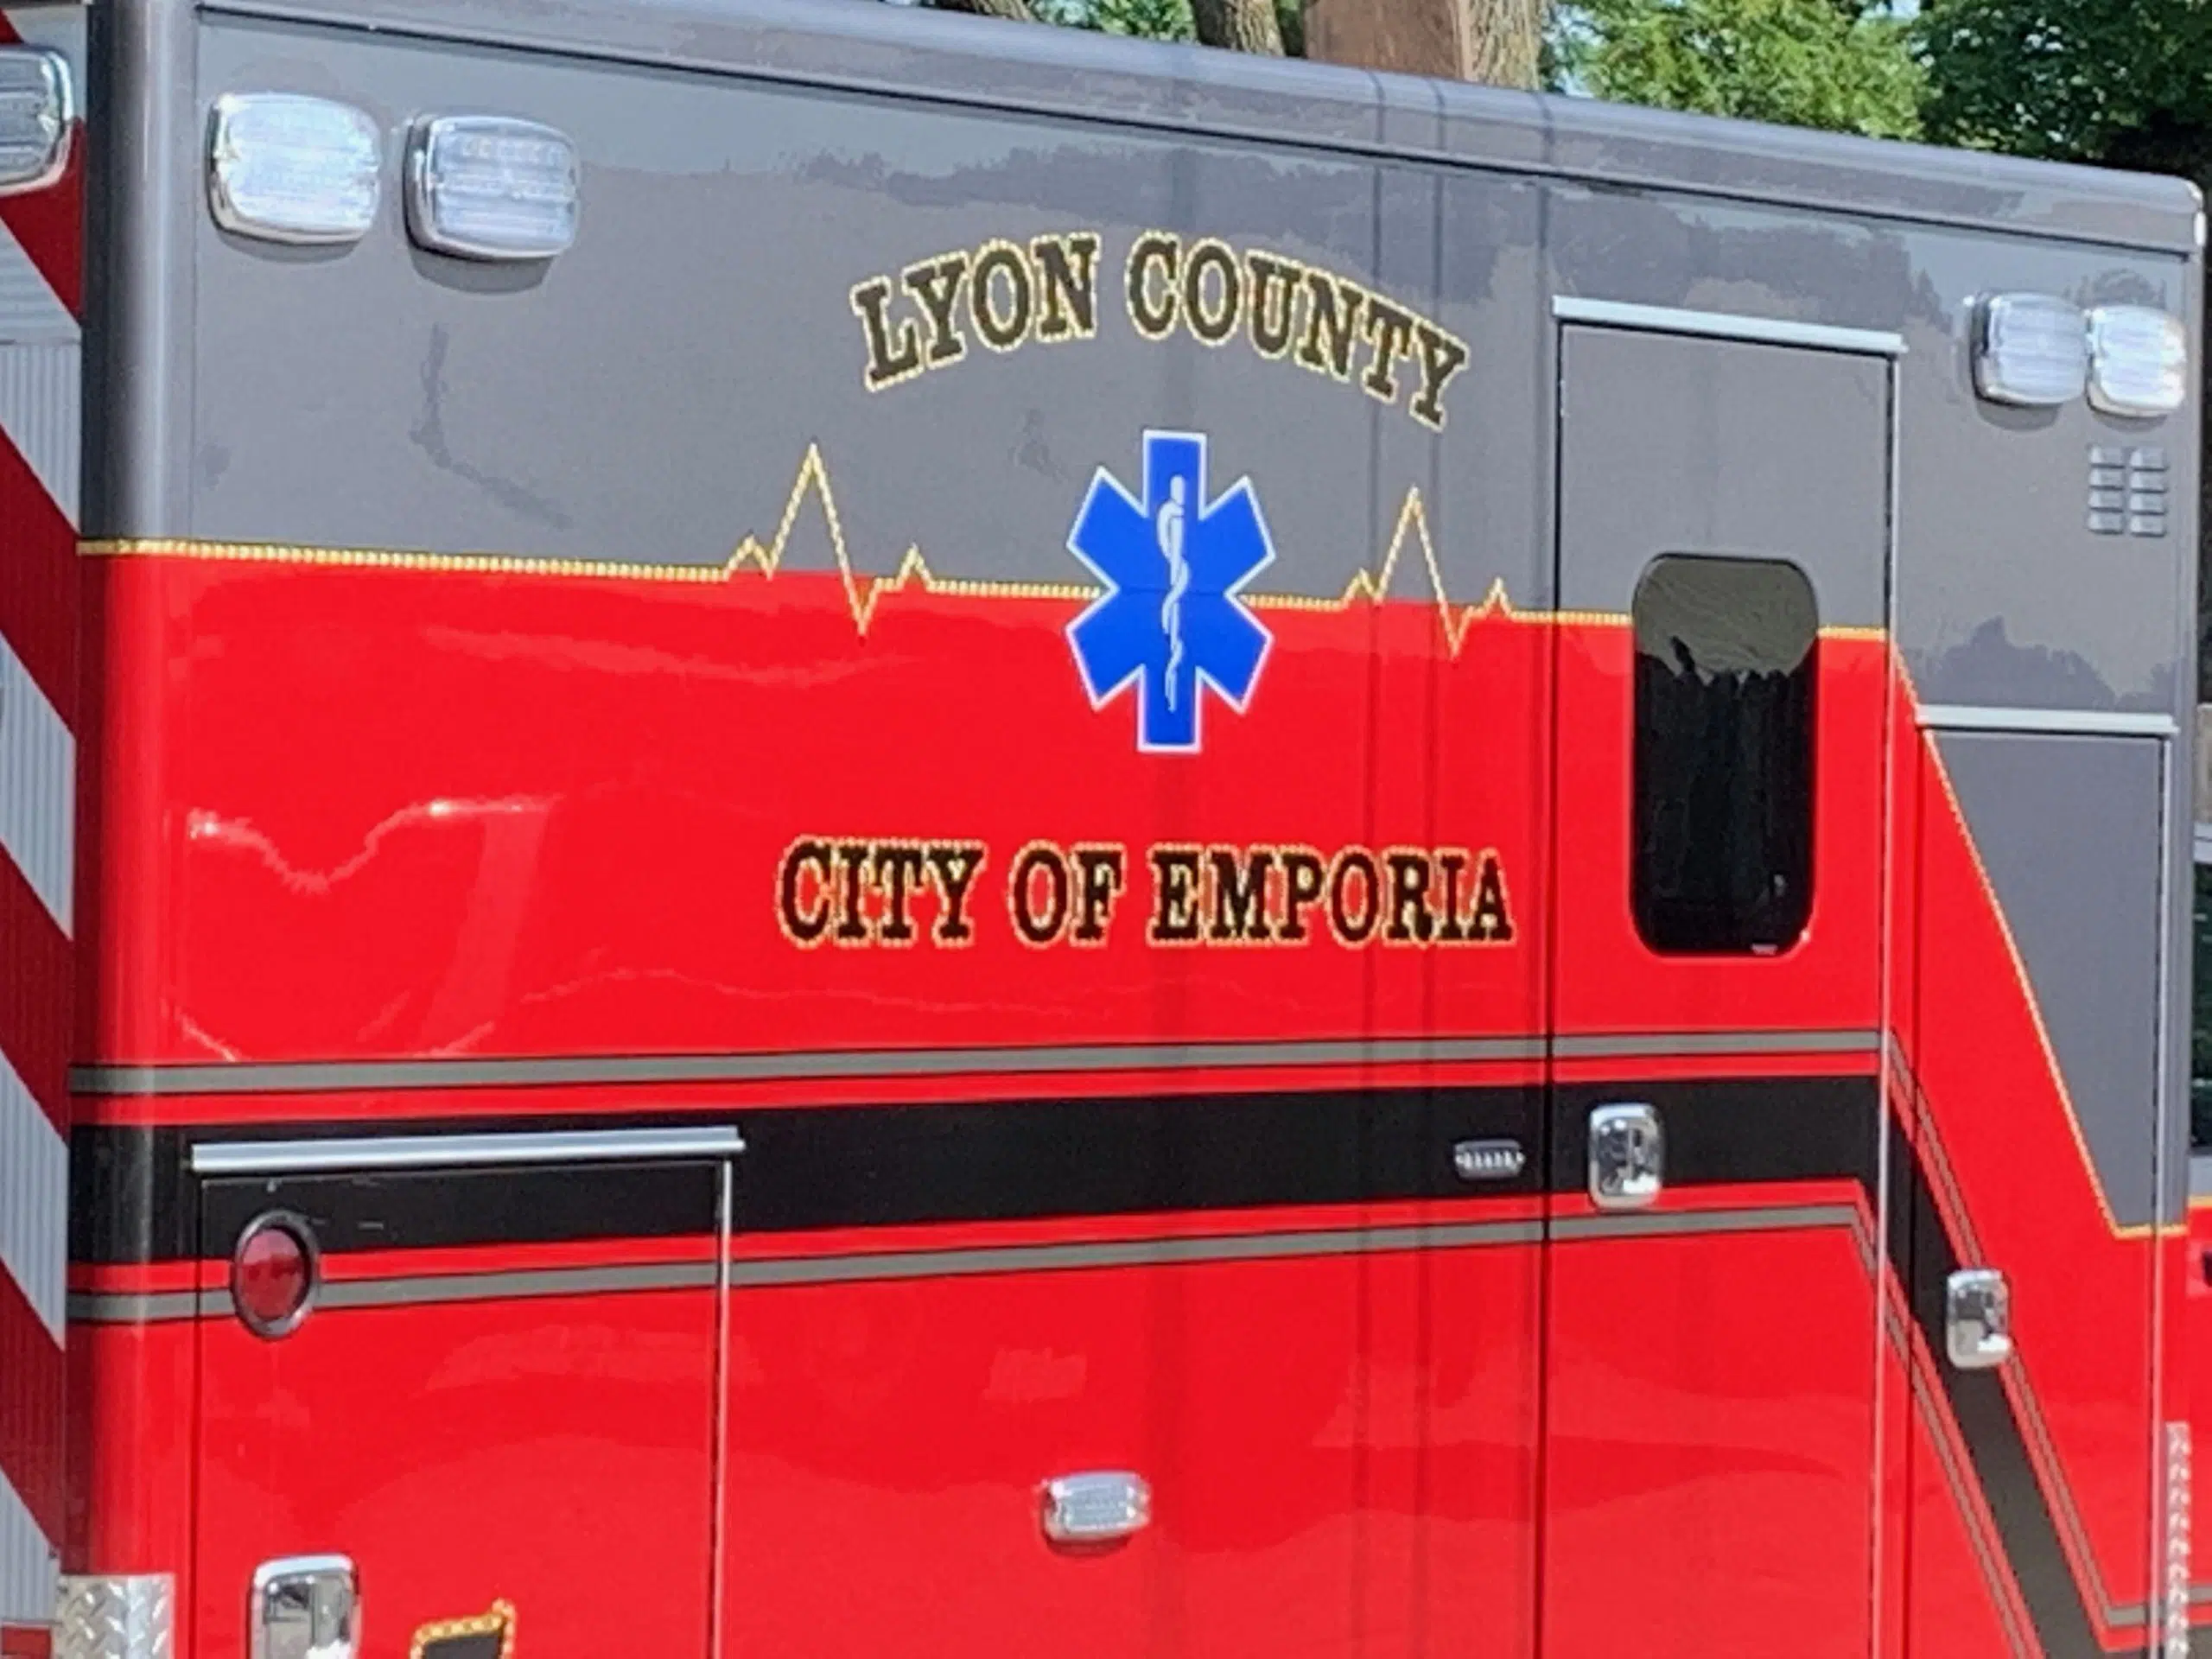 Emporia-Lyon County EMS responds to two reported injury crashes Sunday